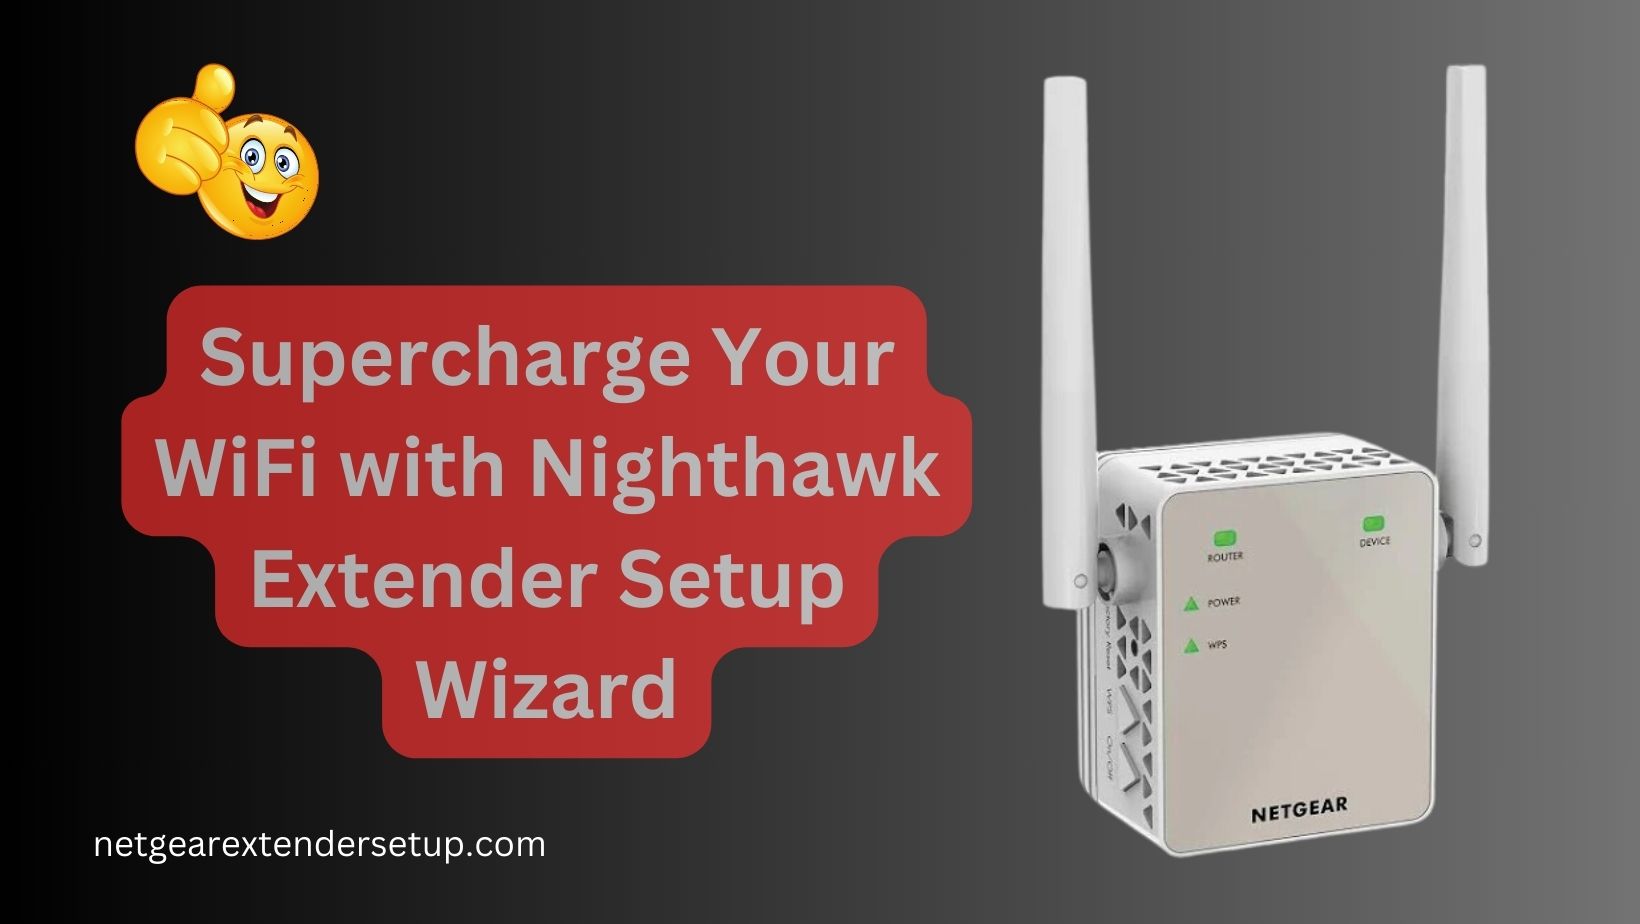 You are currently viewing Supercharge Your WiFi with Nighthawk Extender Setup Wizard